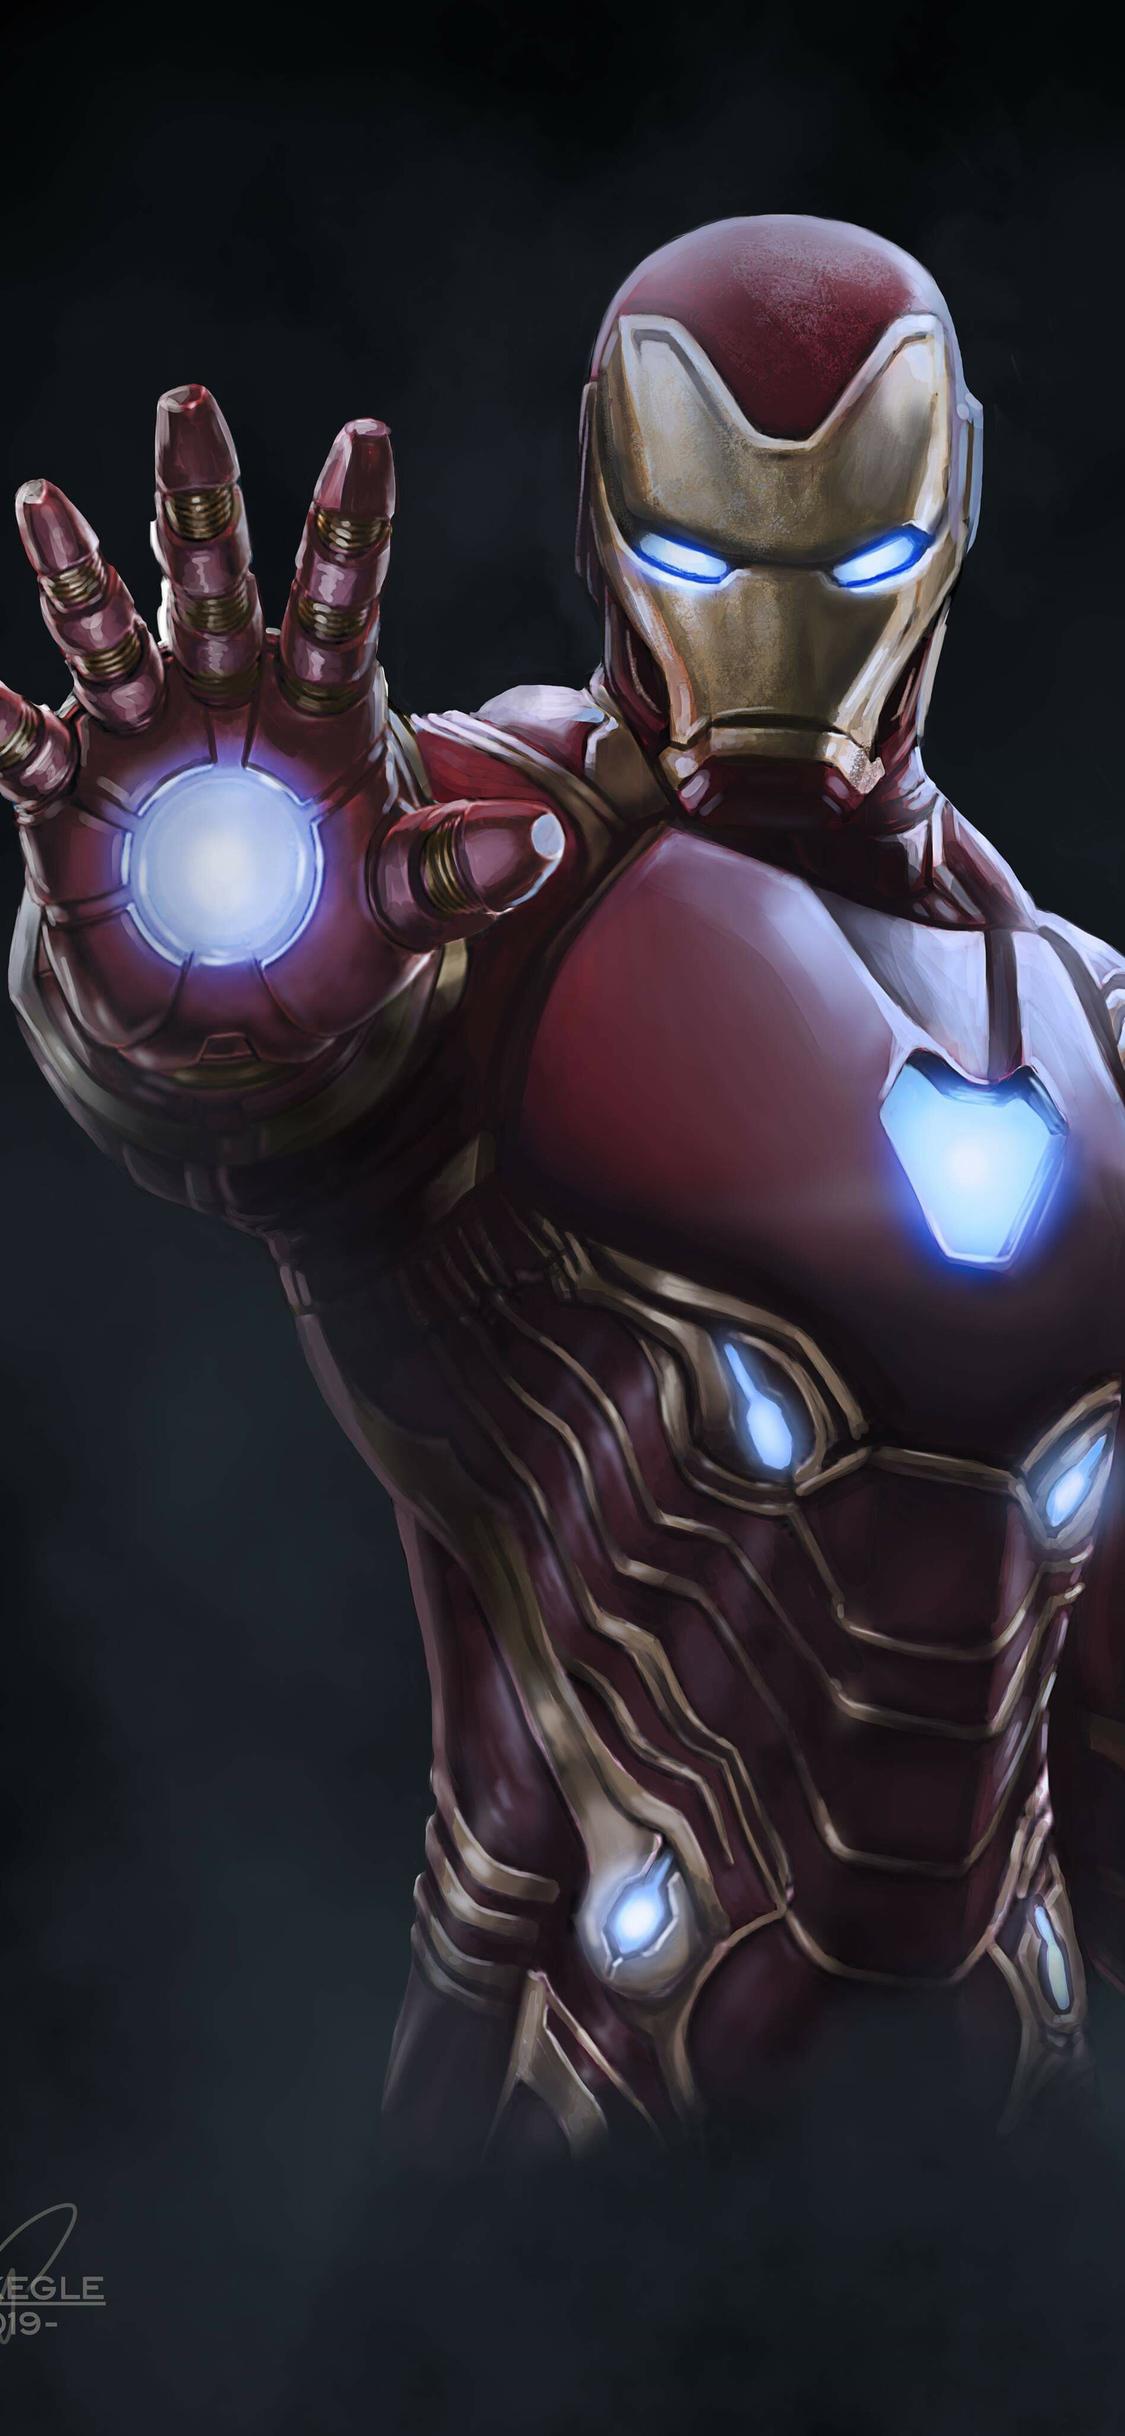 1080p Images: Iron Man Wallpaper Hd For Iphone Xs Max